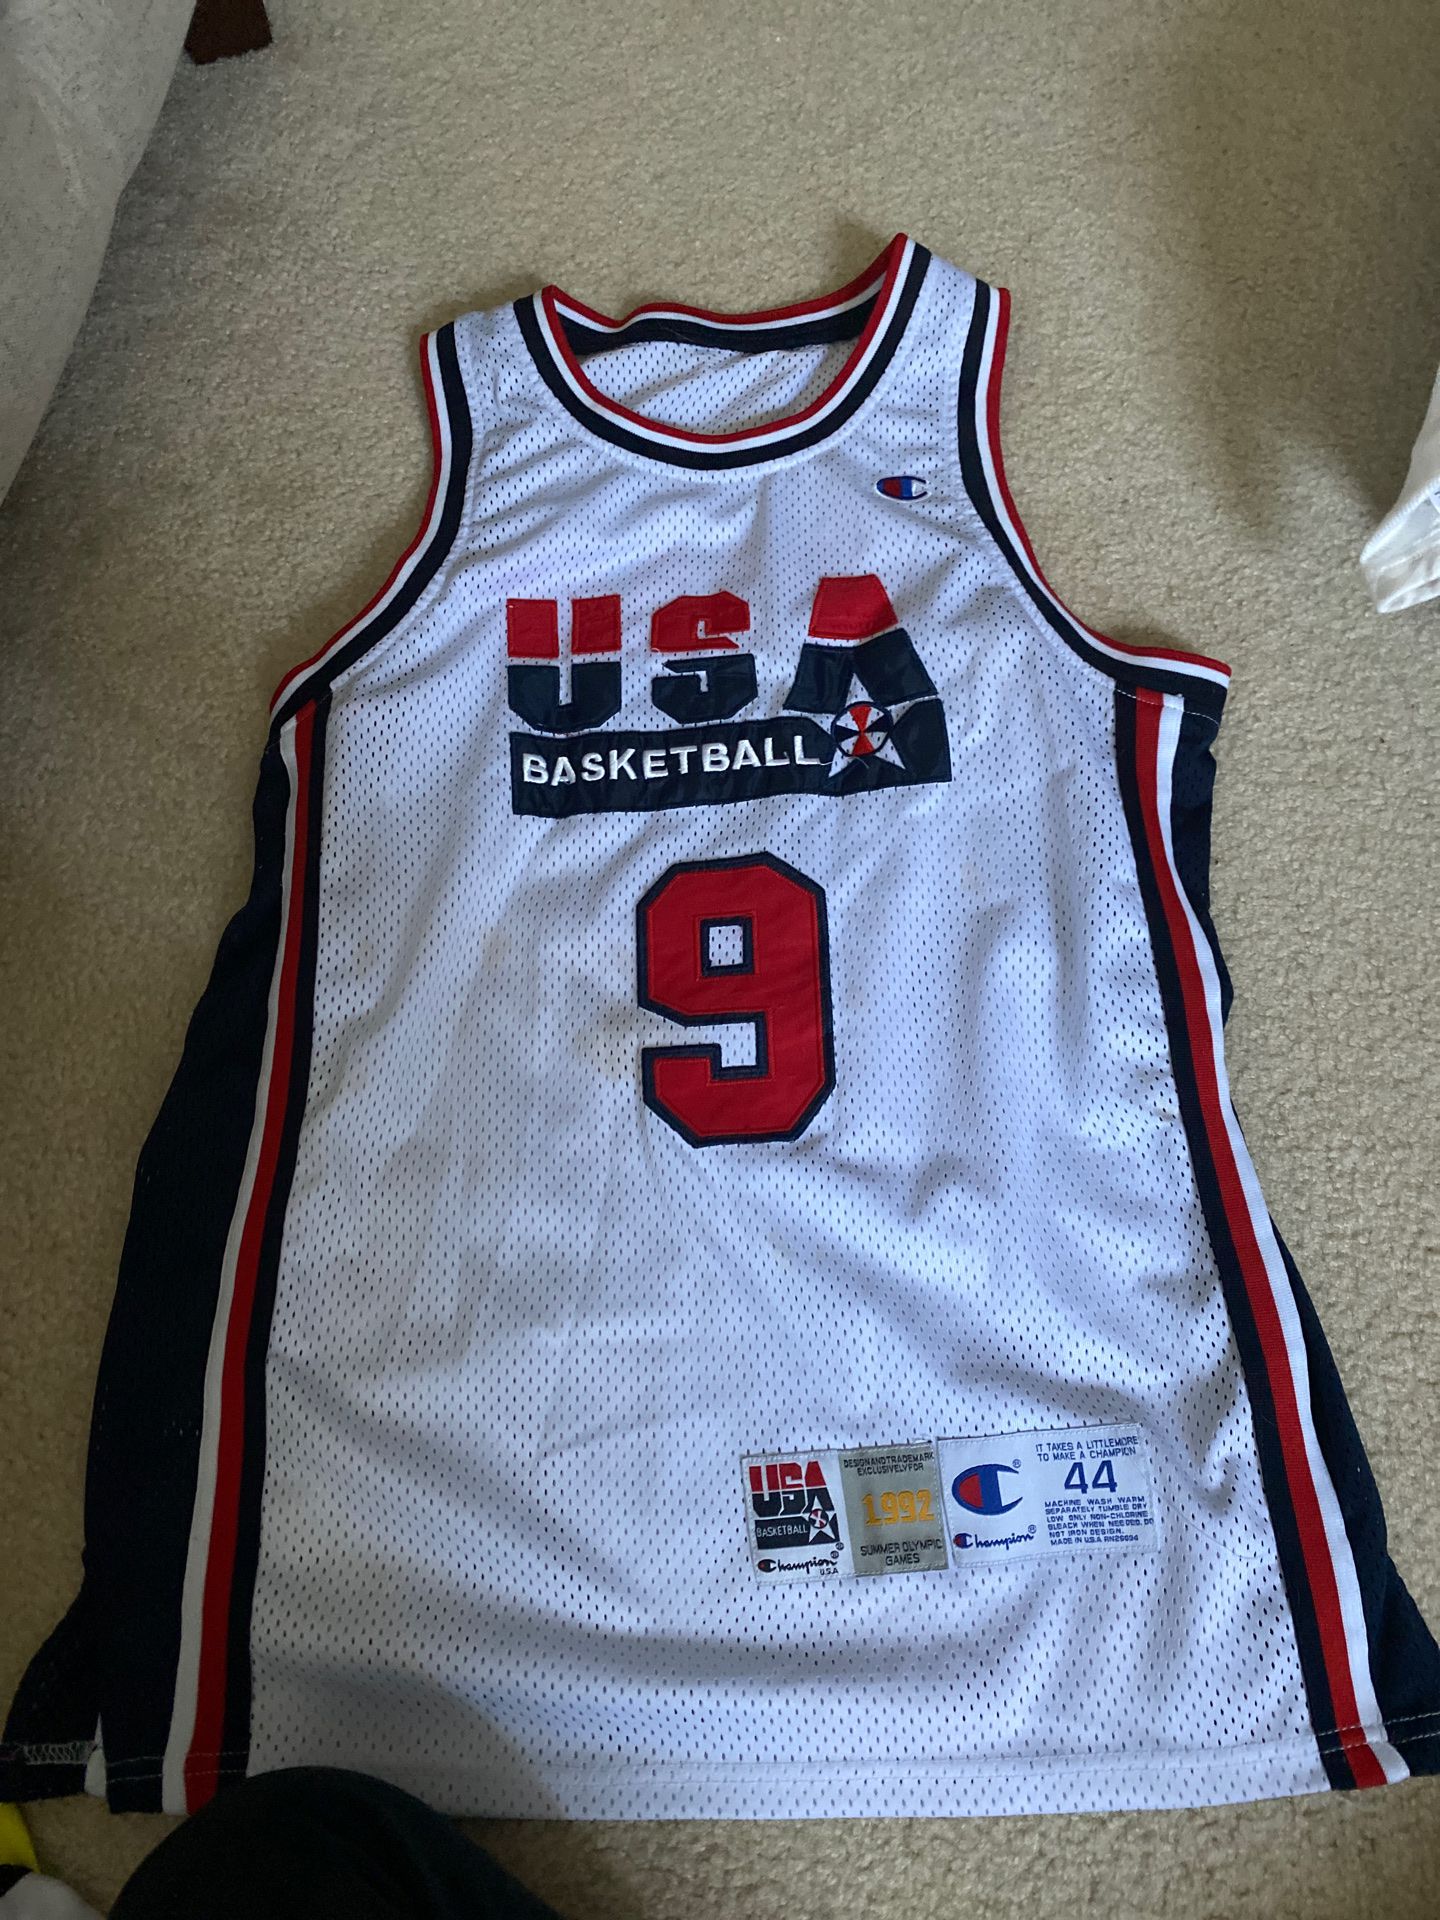 Authentic basketball jersey